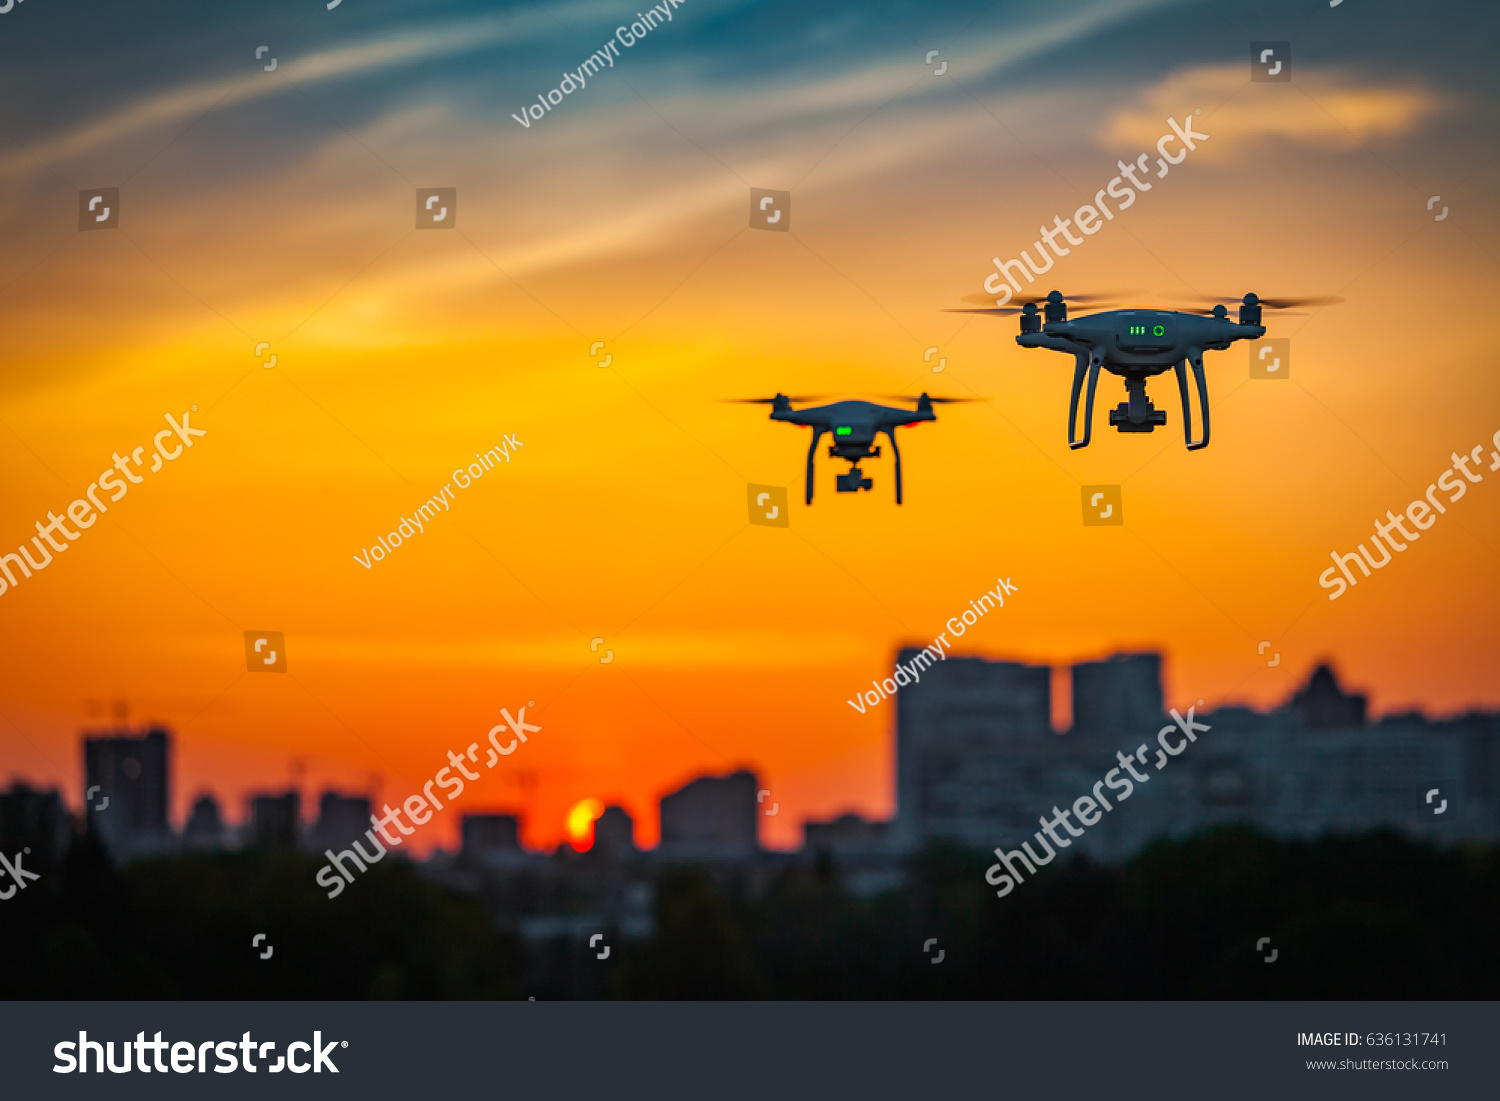 Two drone quad copters with high resolution digital camera flying aerial over spectacular sunset orange sky. Cityscape silhouette with sun goes down in the background.Vehicle at sundown and copy space #636131741